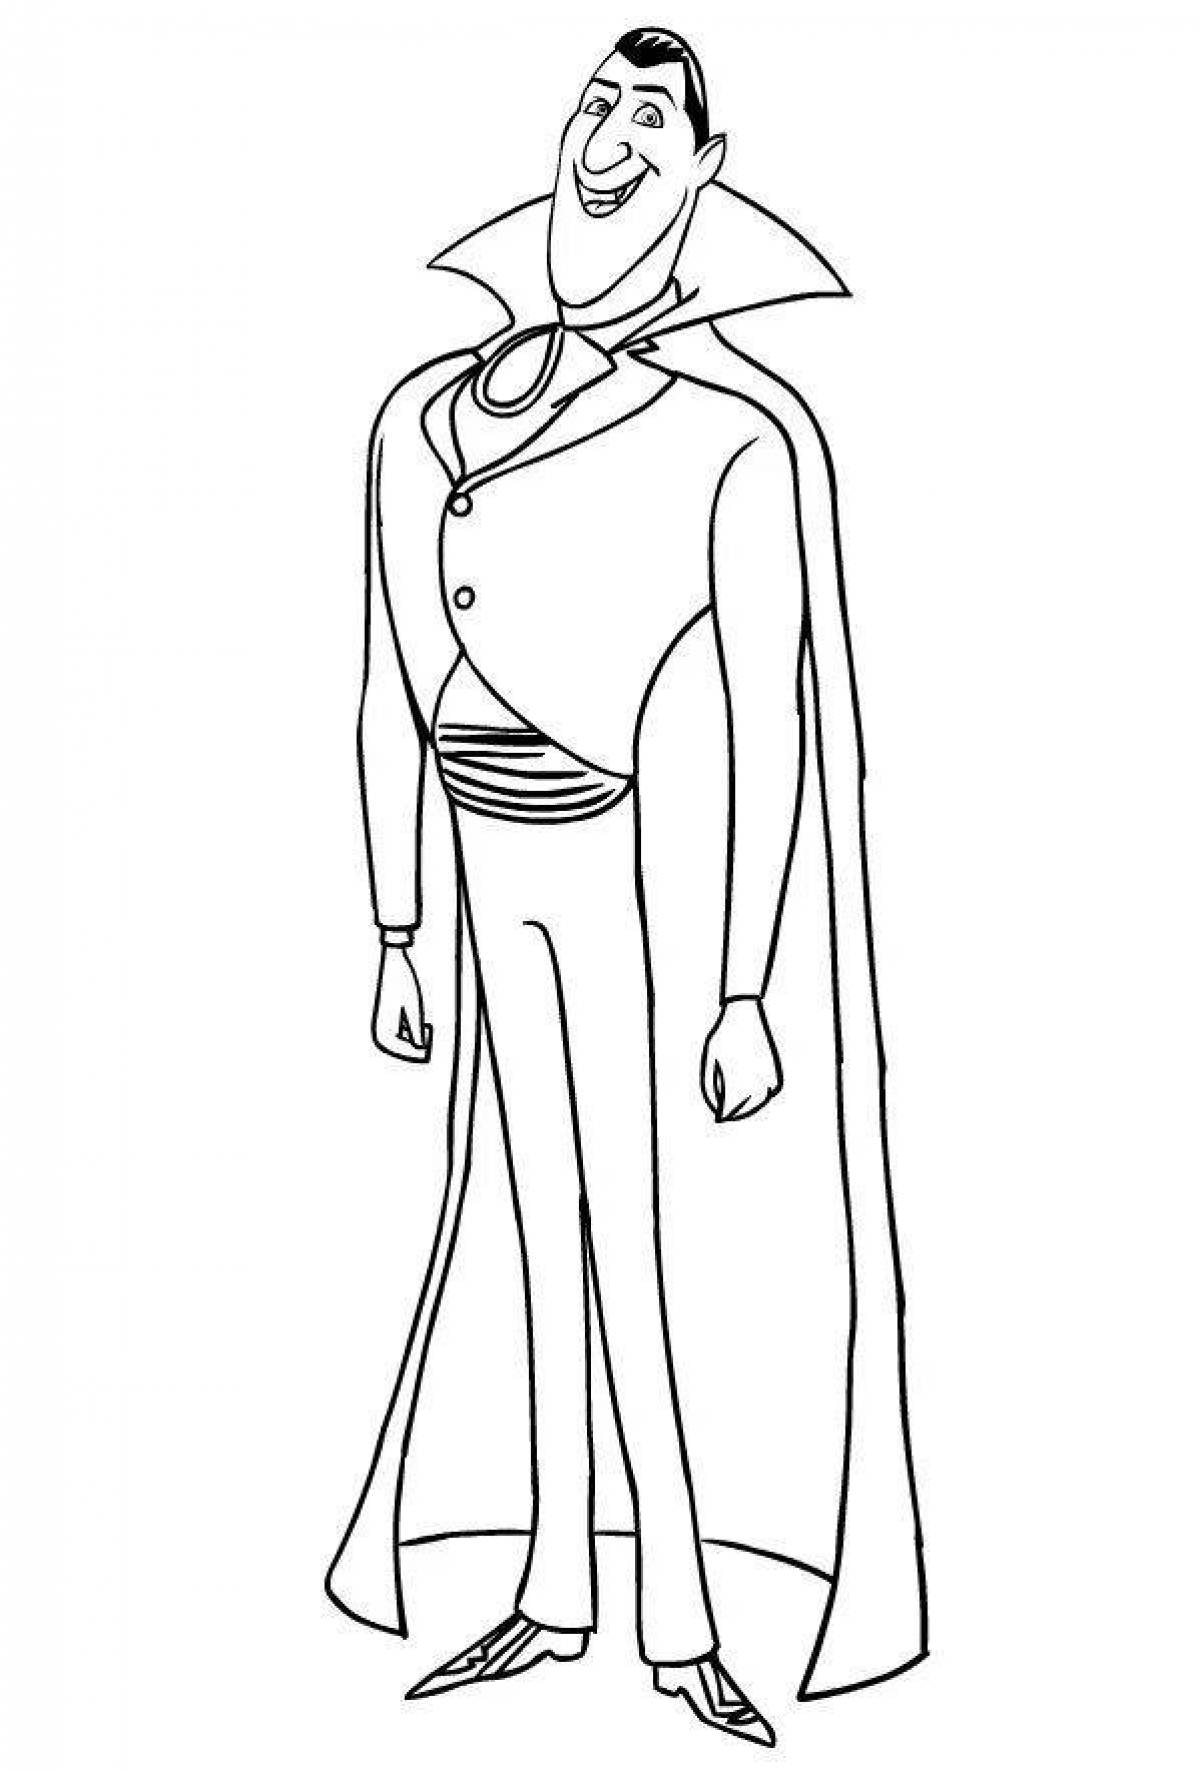 Chilling dracula coloring page